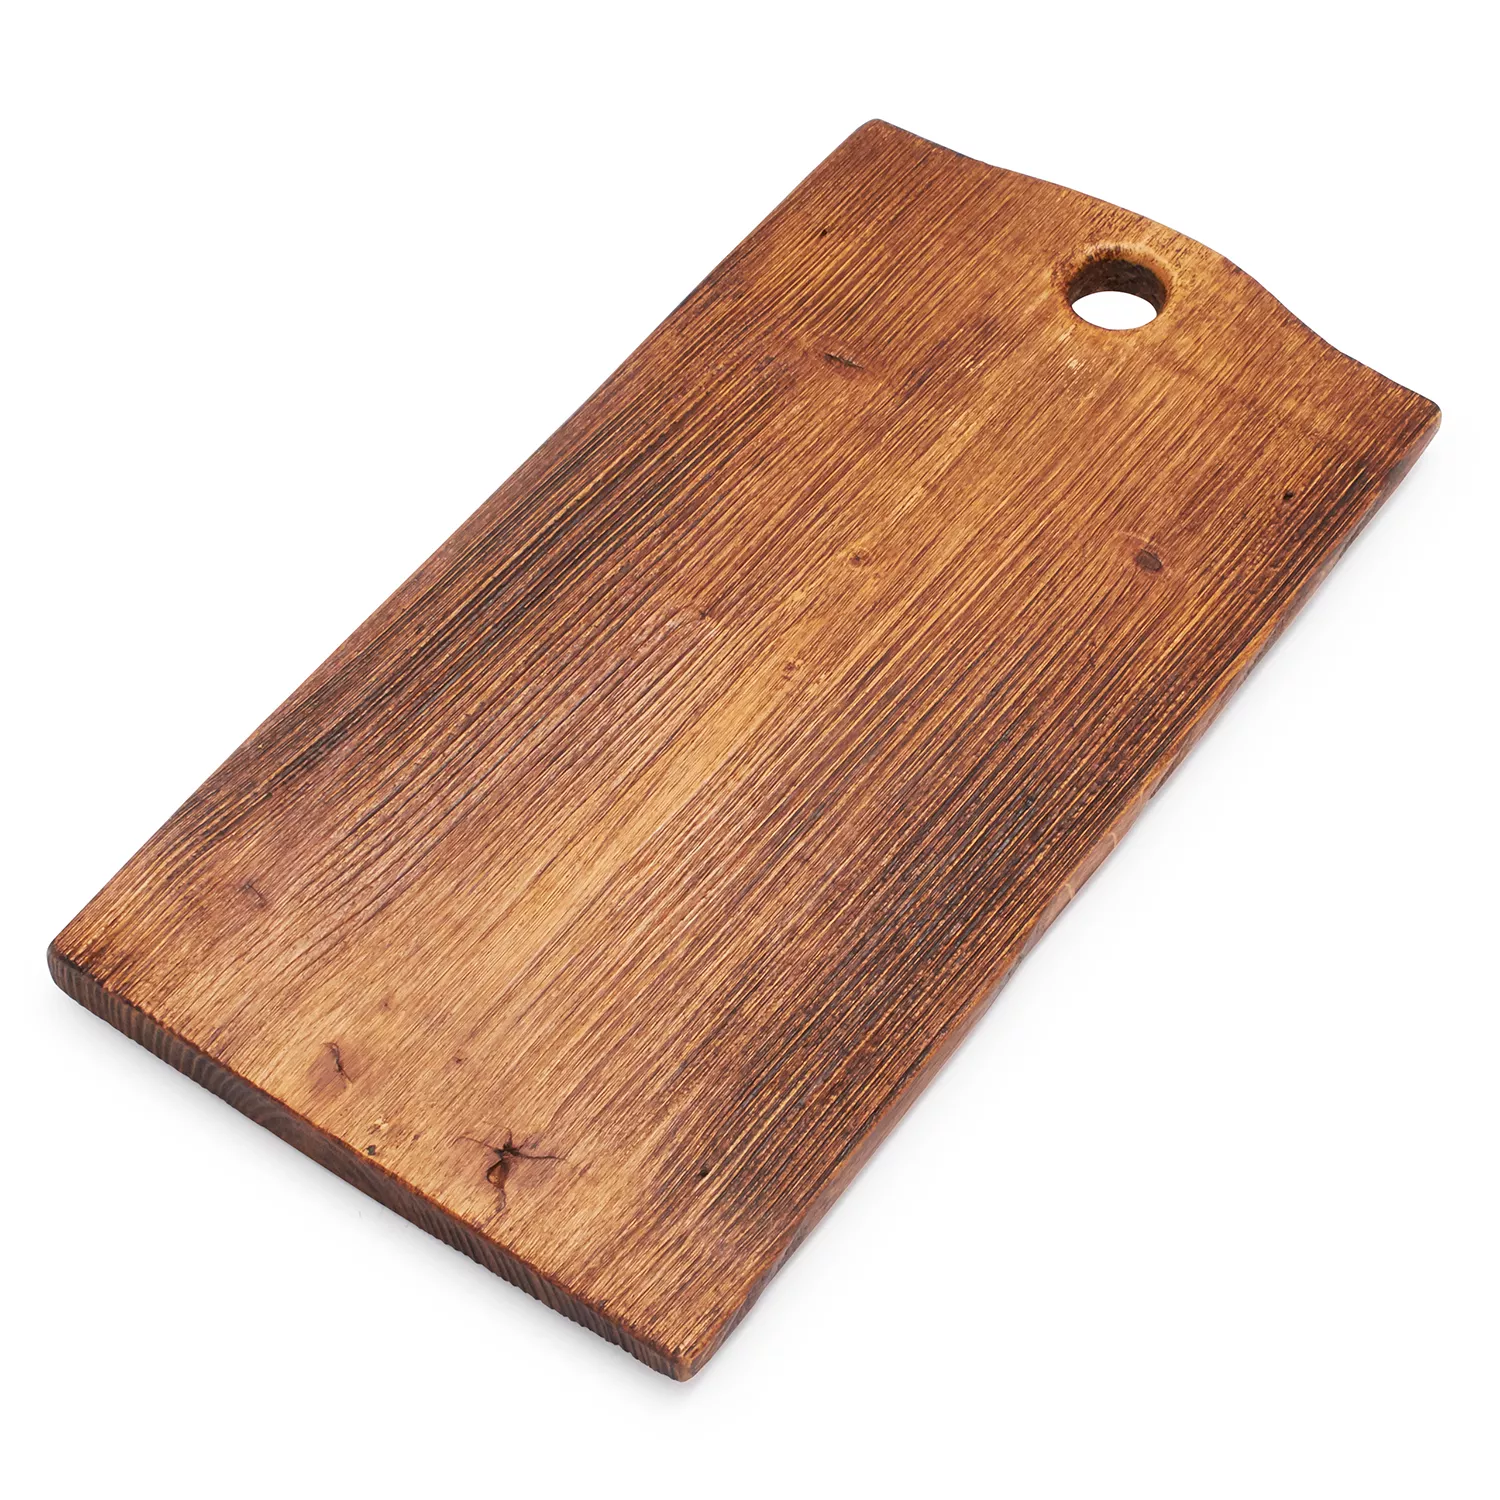 Sur La Table Rustic Reclaimed Wood Cheese Paddle